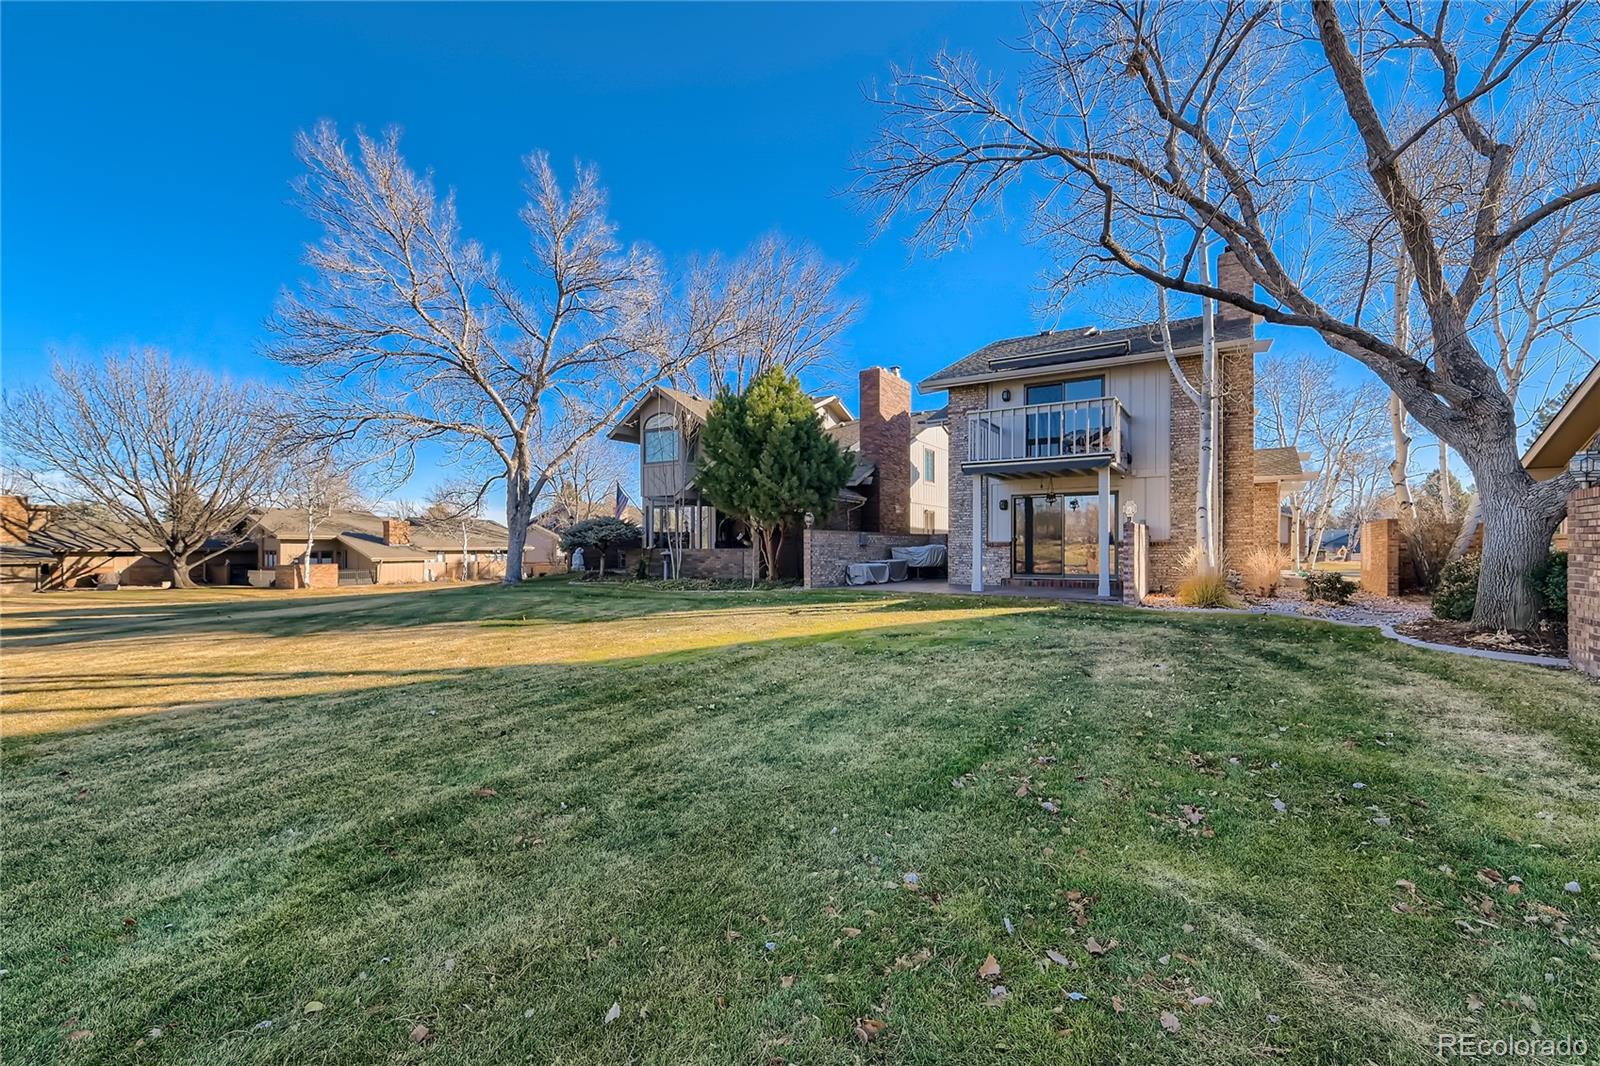 1357 43rd, Greeley, CO